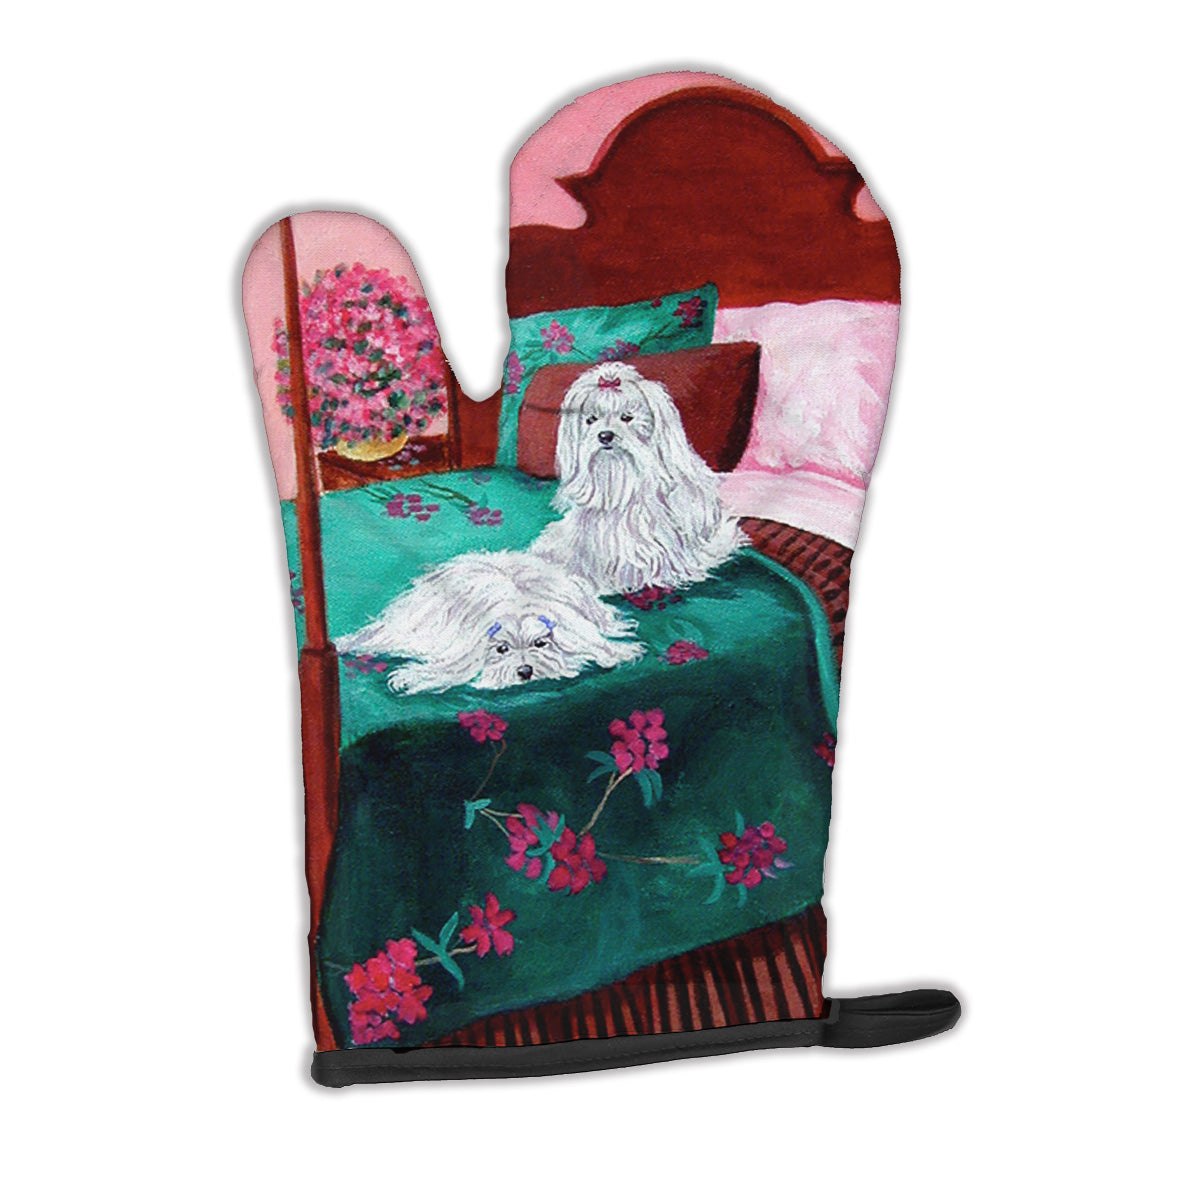 Maltese and puppy waiting on you Oven Mitt 7110OVMT